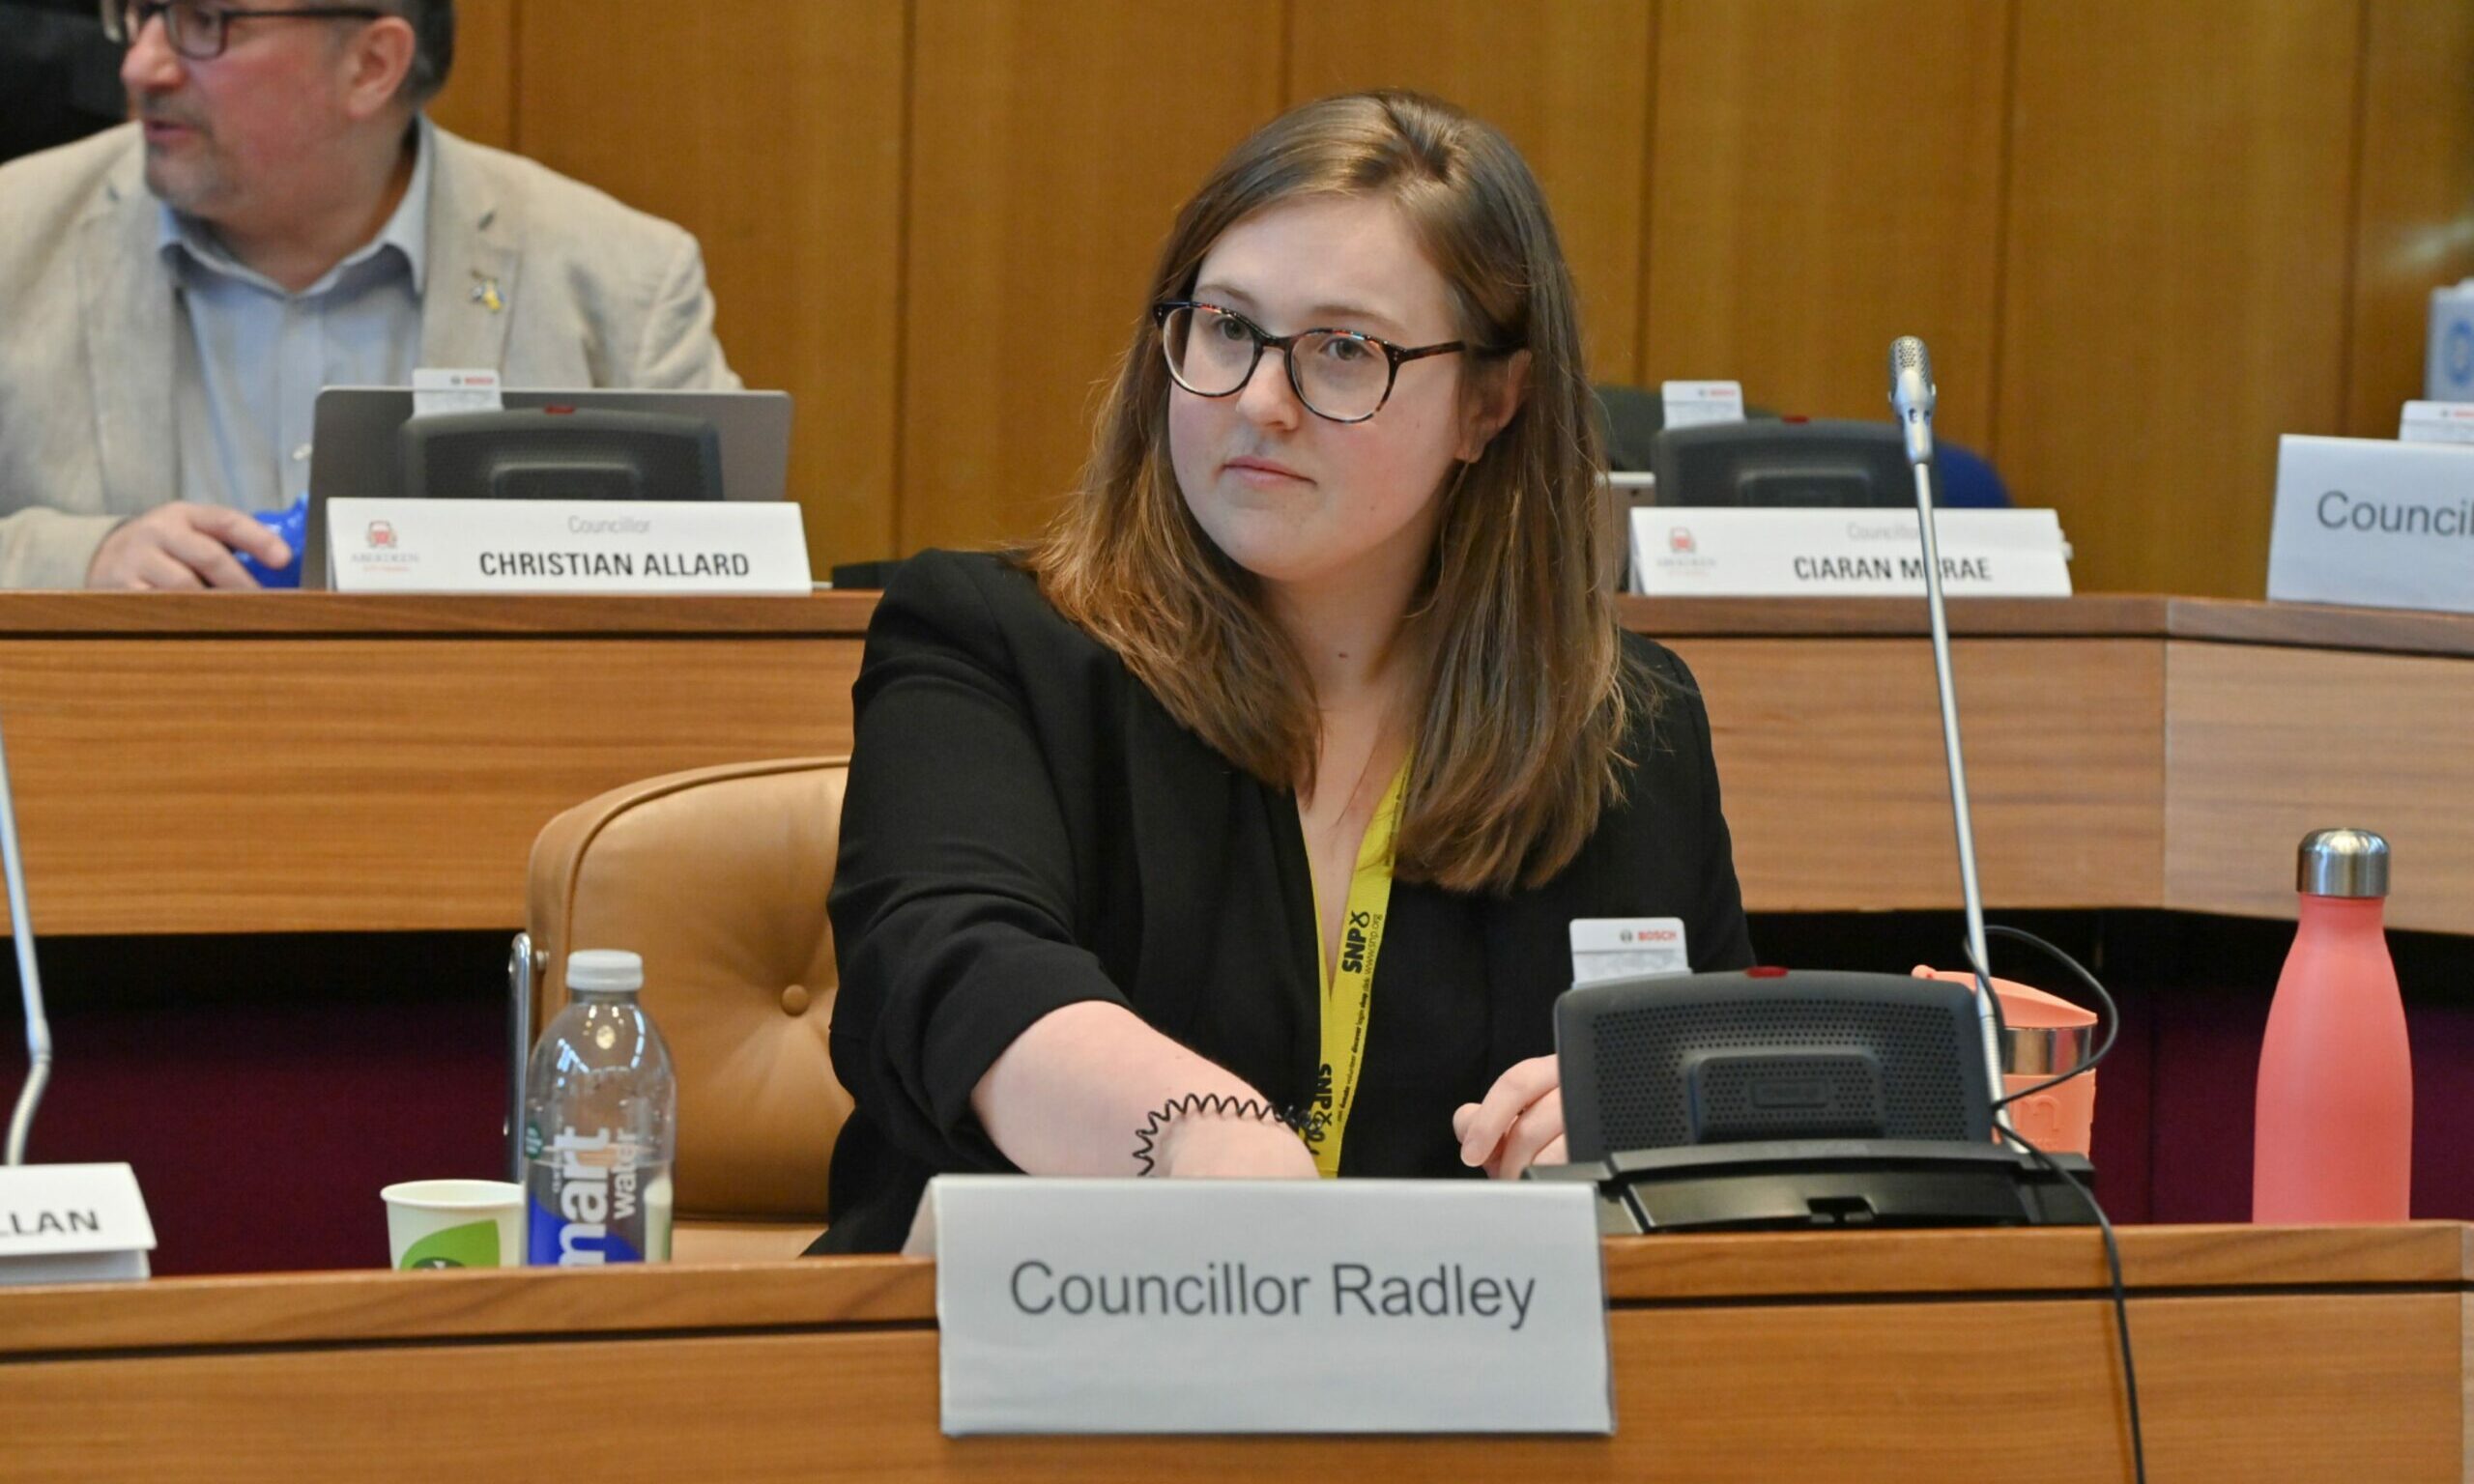 Public protection convener Miranda Radley encouraged councillors to 'push the narrative' that Aberdeen city centre is safe. Image: Kenny Elrick/DC Thomson